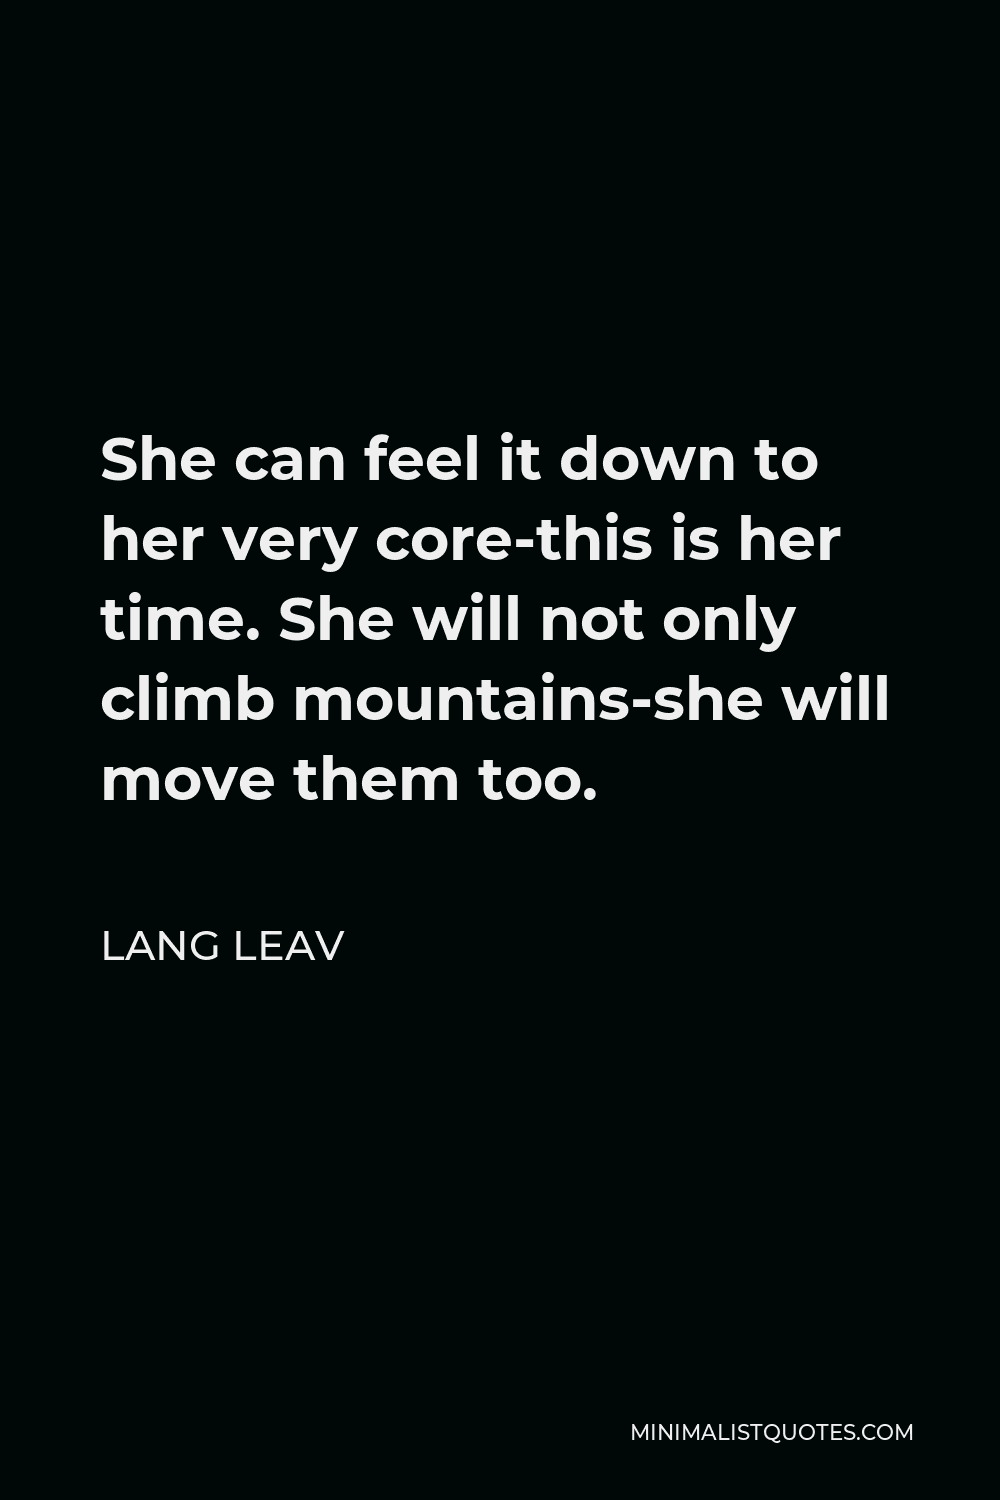 Lang Leav Quote - She can feel it down to her very core-this is her time. She will not only climb mountains-she will move them too.